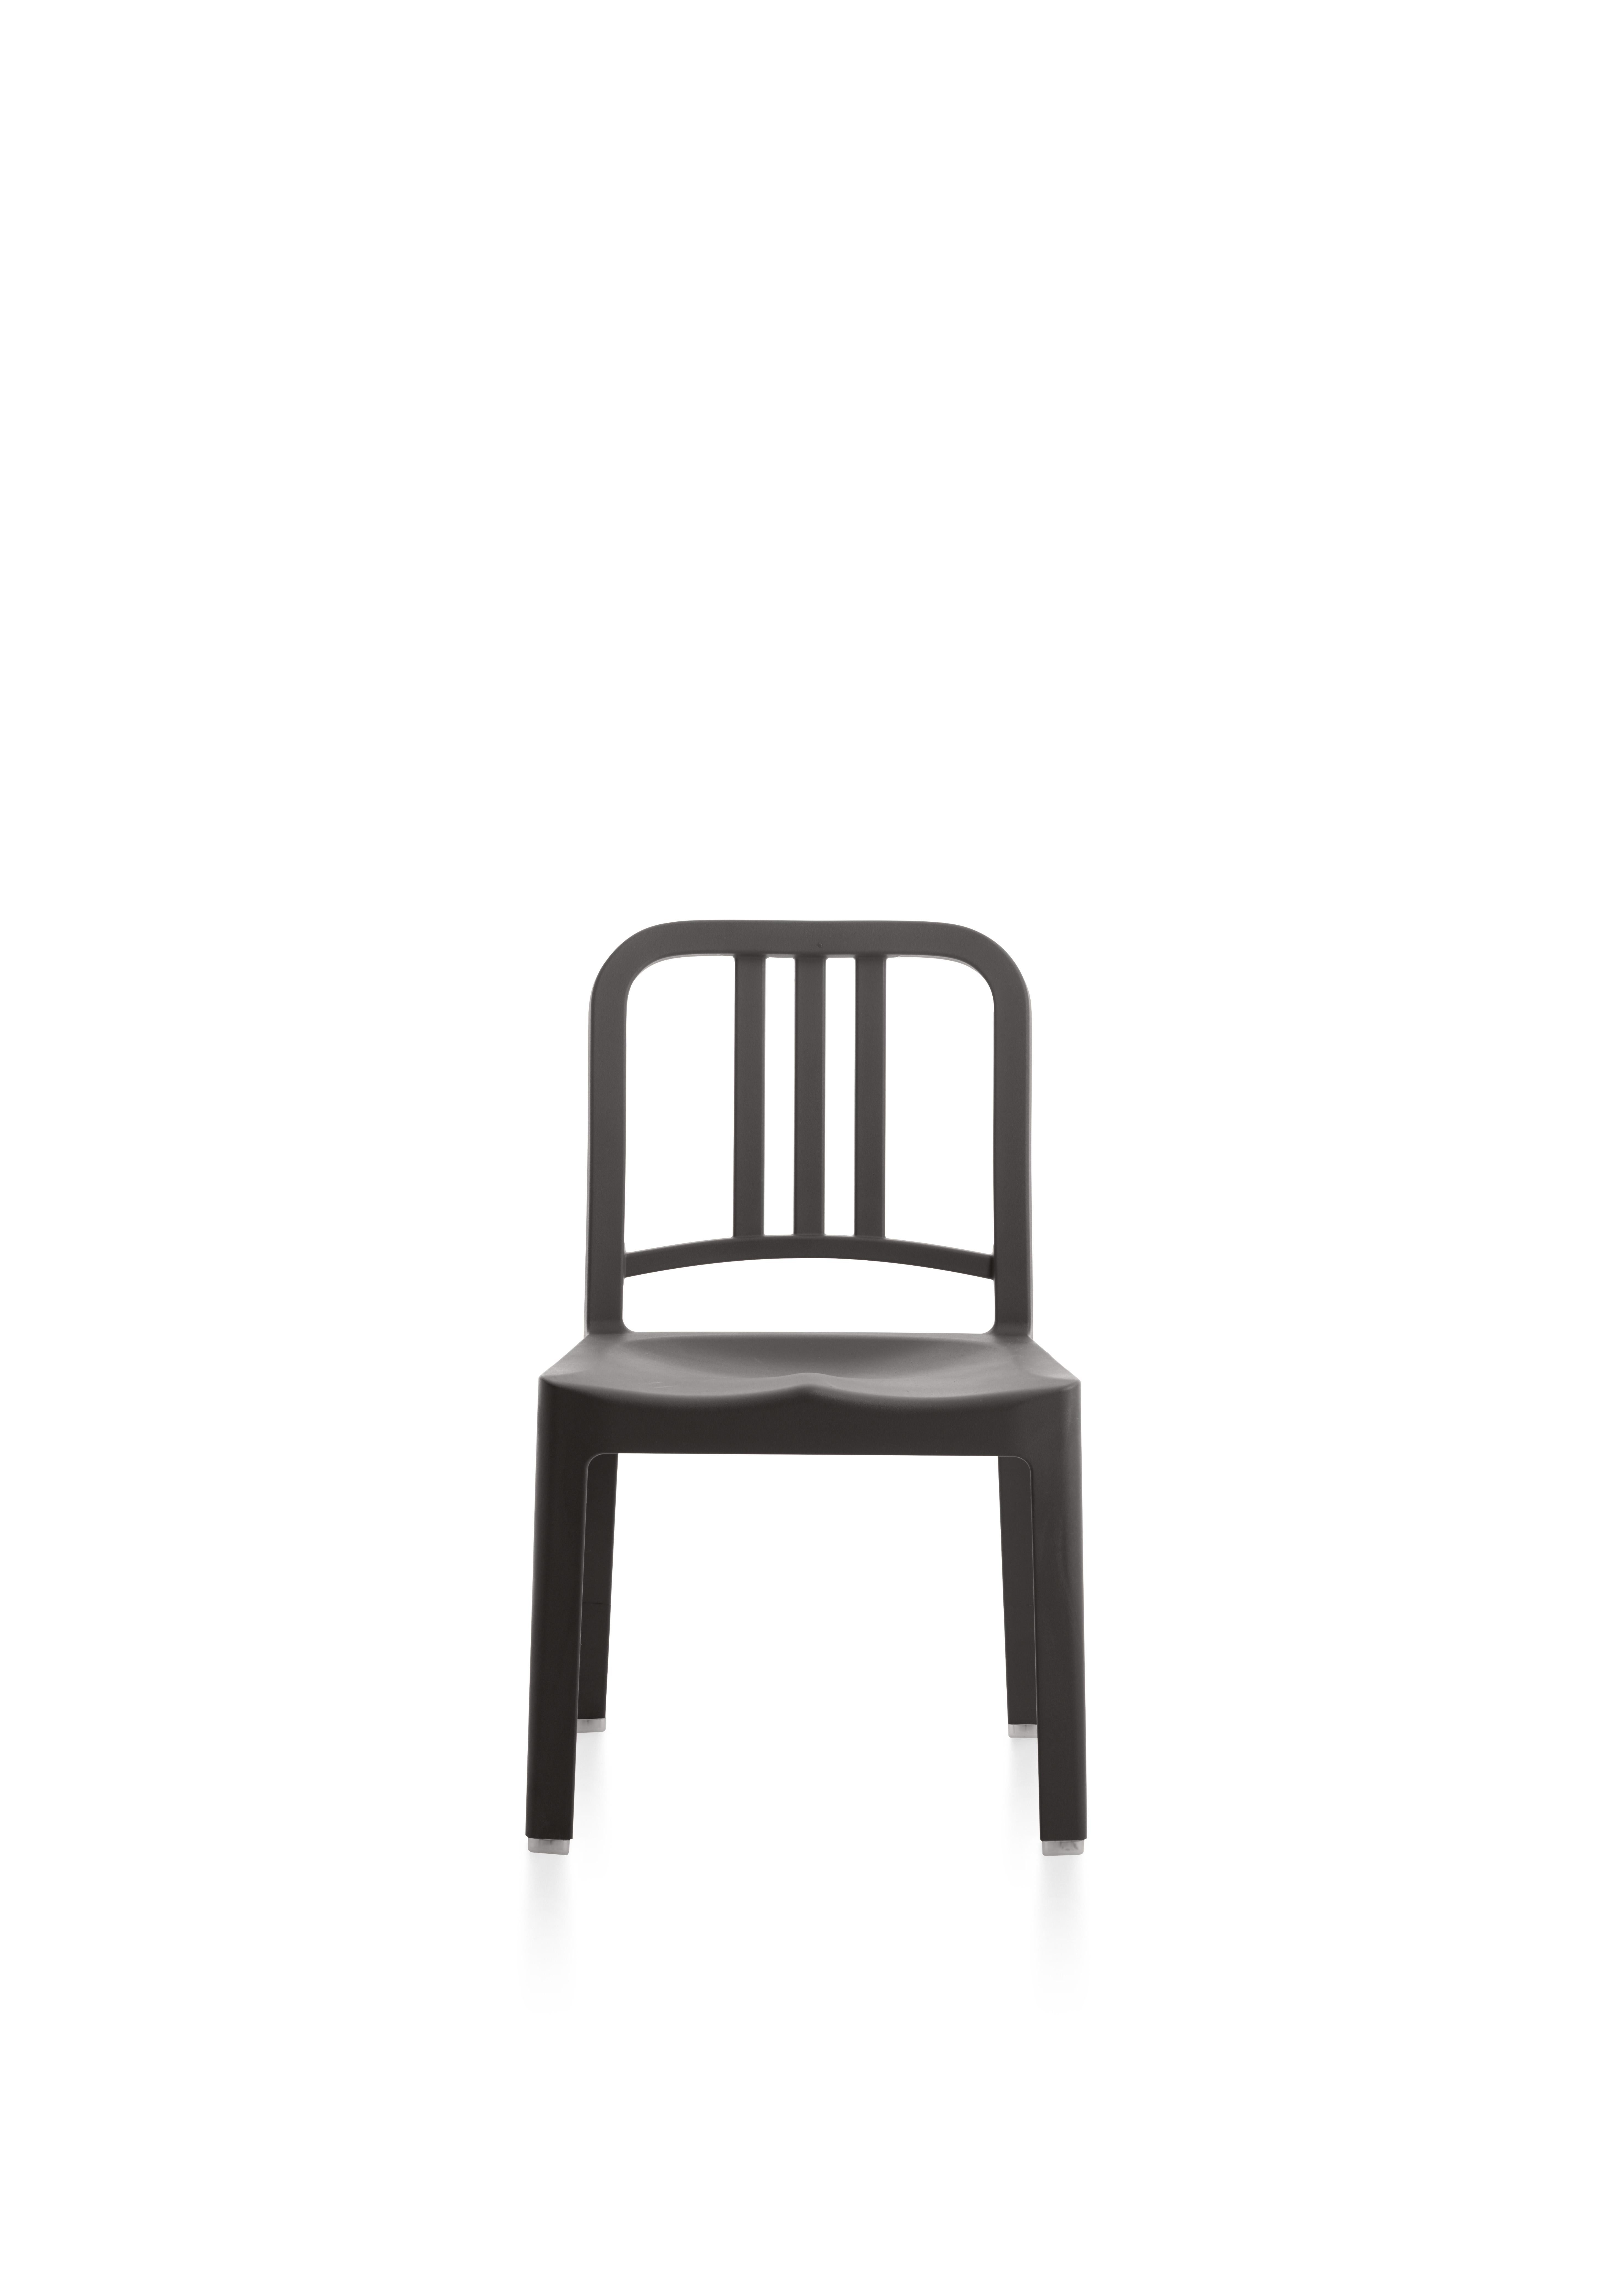 For Sale: Black (Charcoal) 111 Navy Mini Chair by Coca-Cola